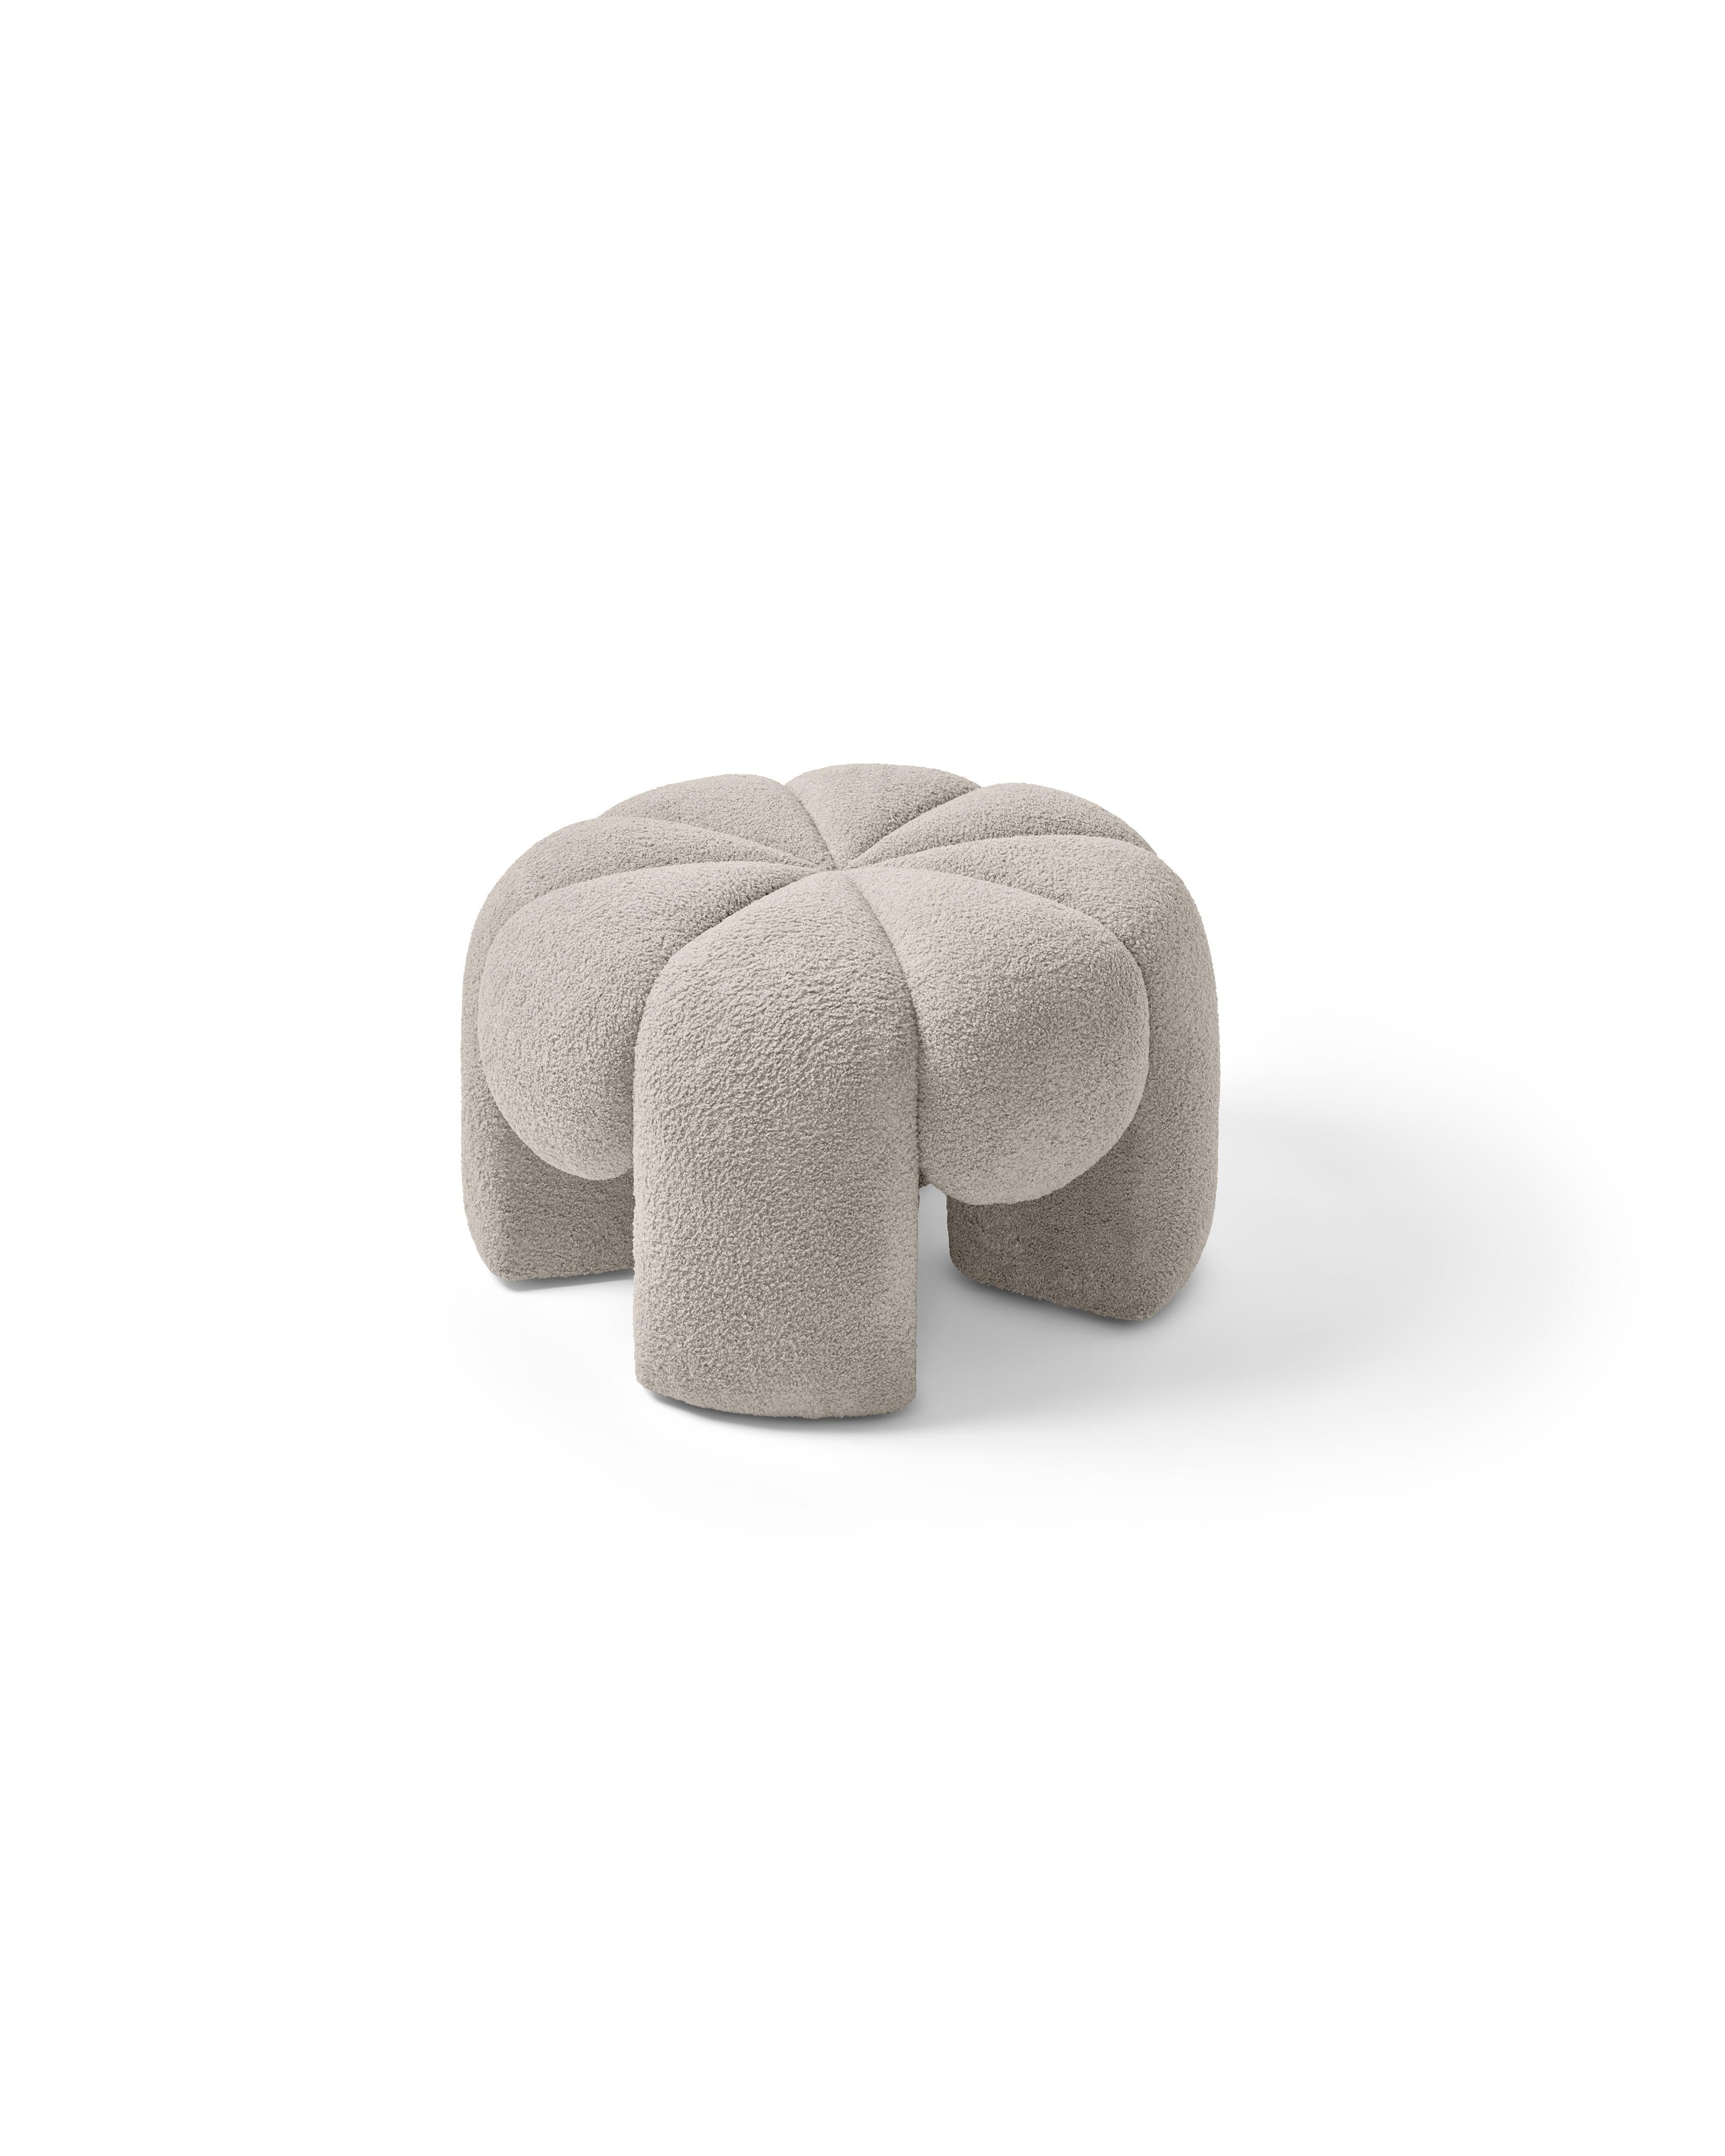 fluffy puffy 'Big Marshmallow' pouf For Sale 1